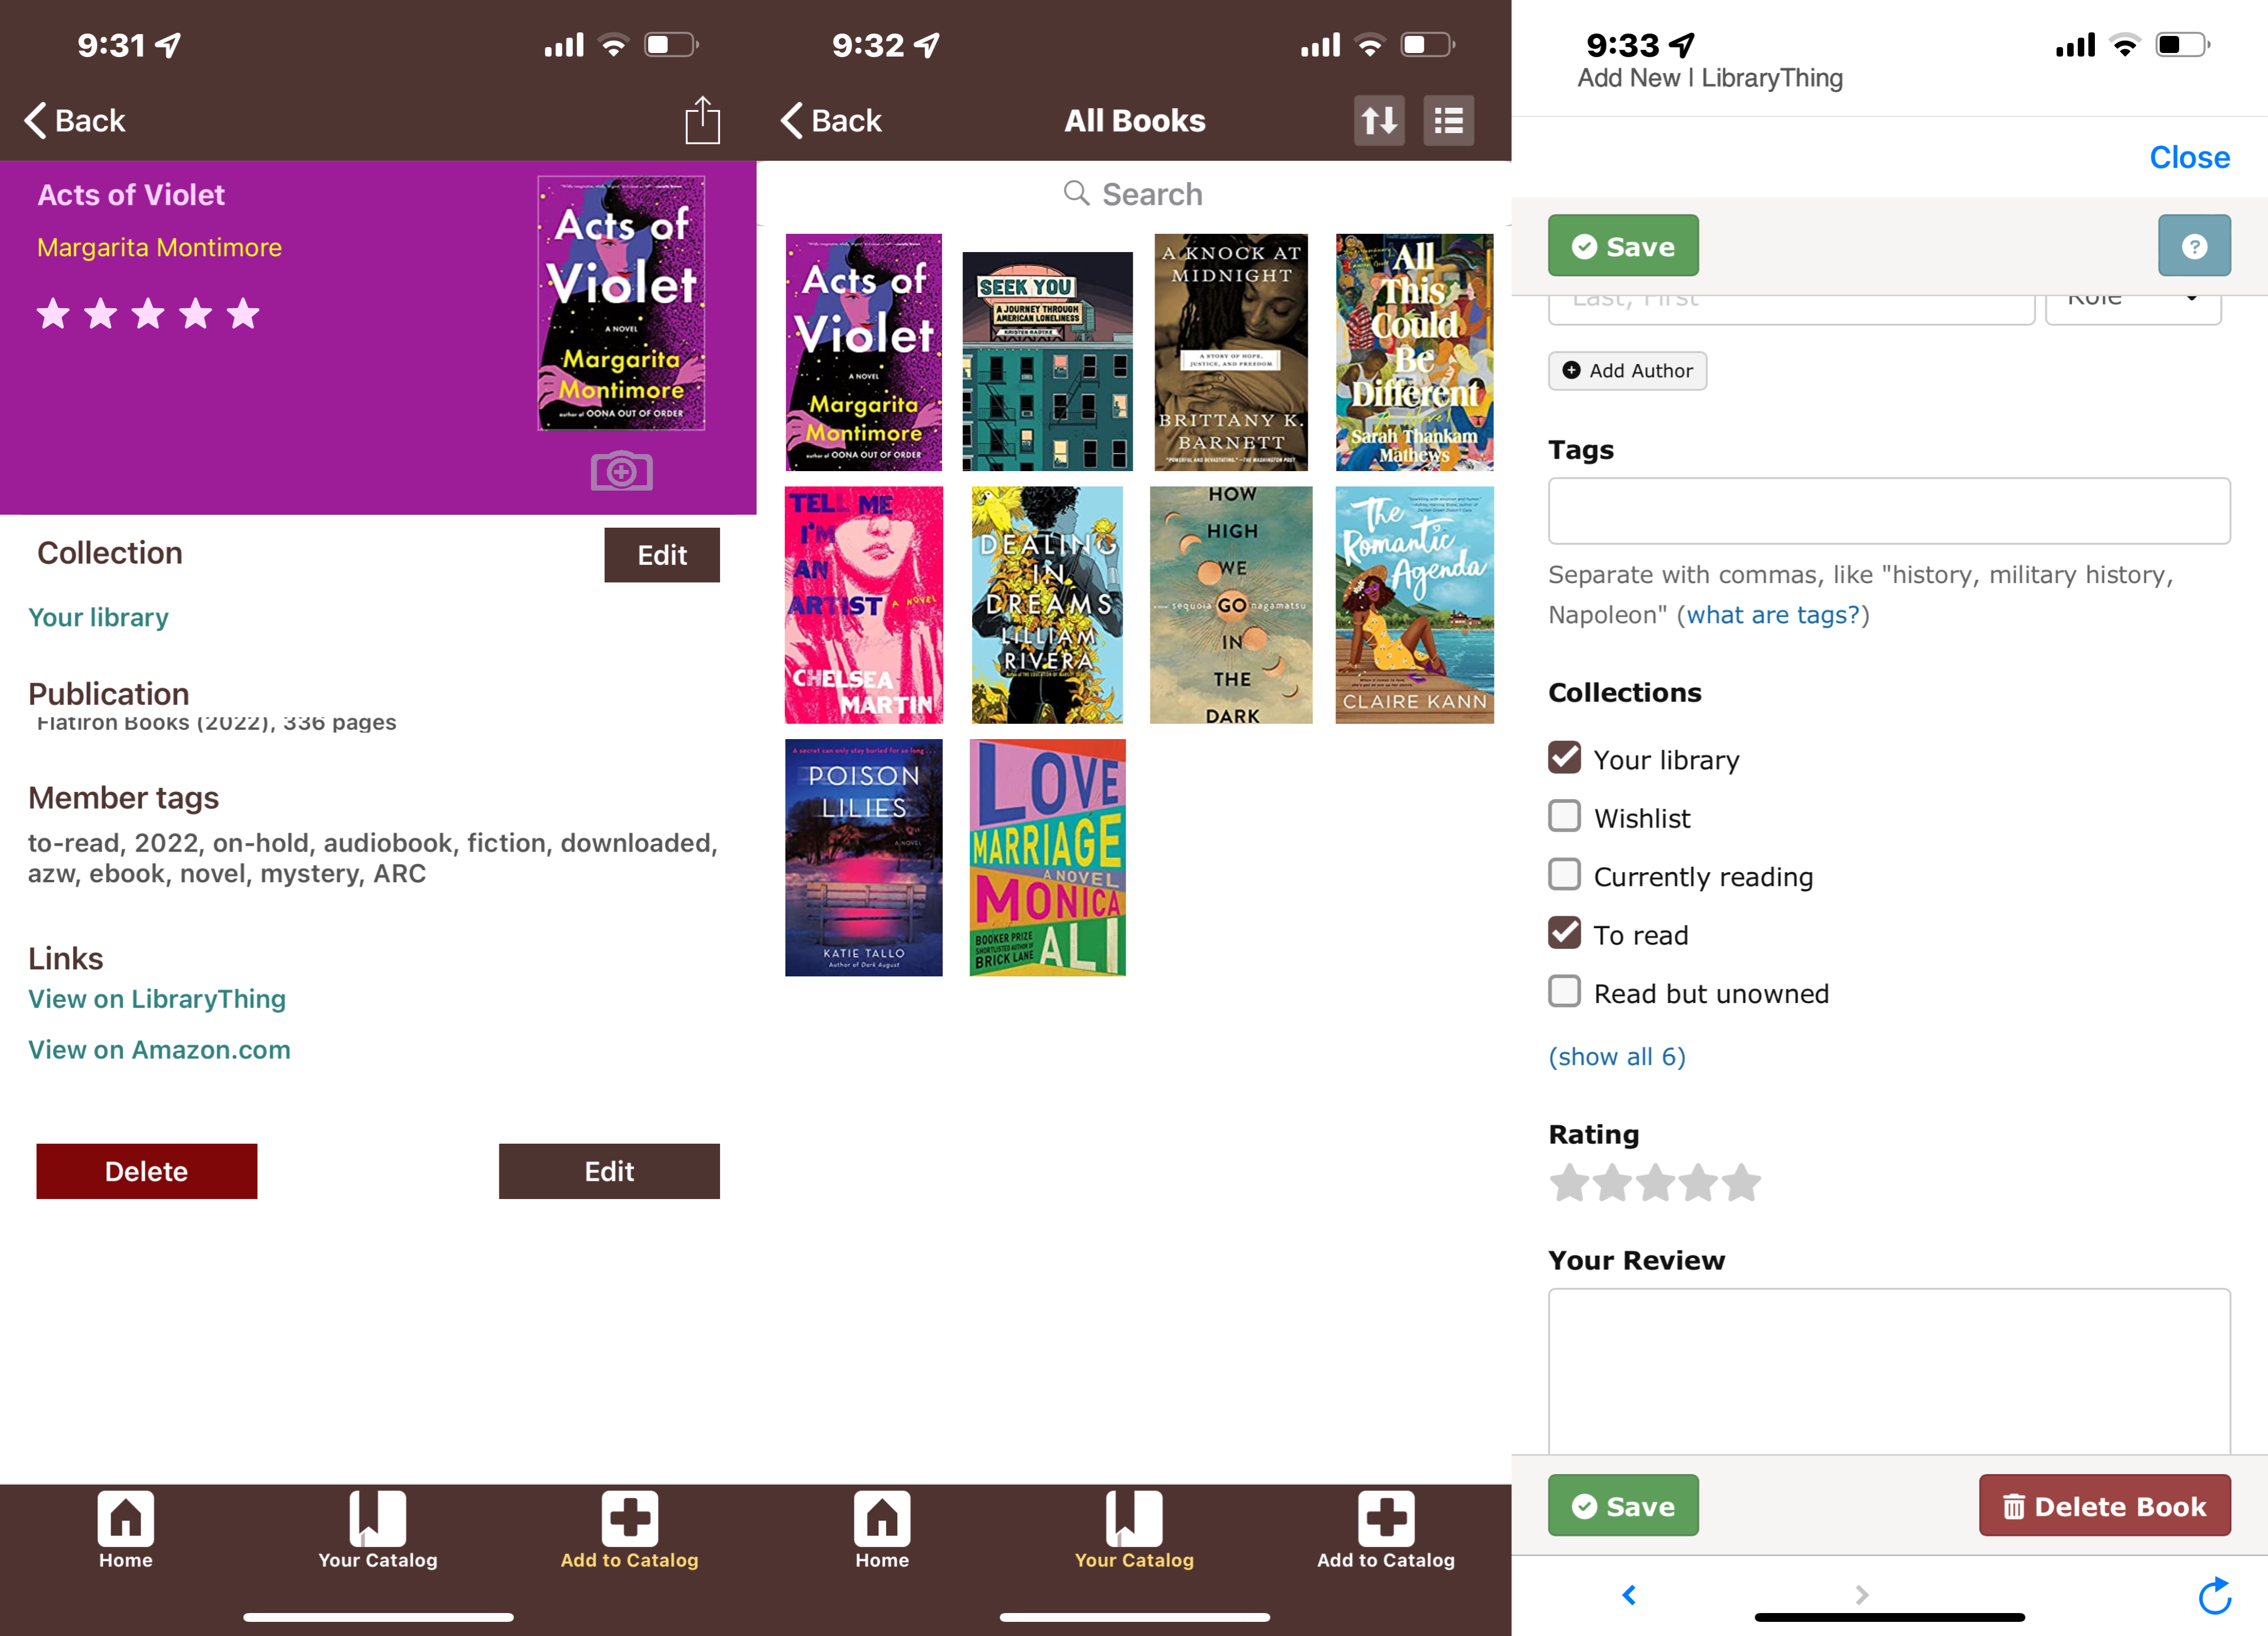 3 screenshots of the Library Thing app showing a book's main catalog page, general library homepage, and shelving system. 